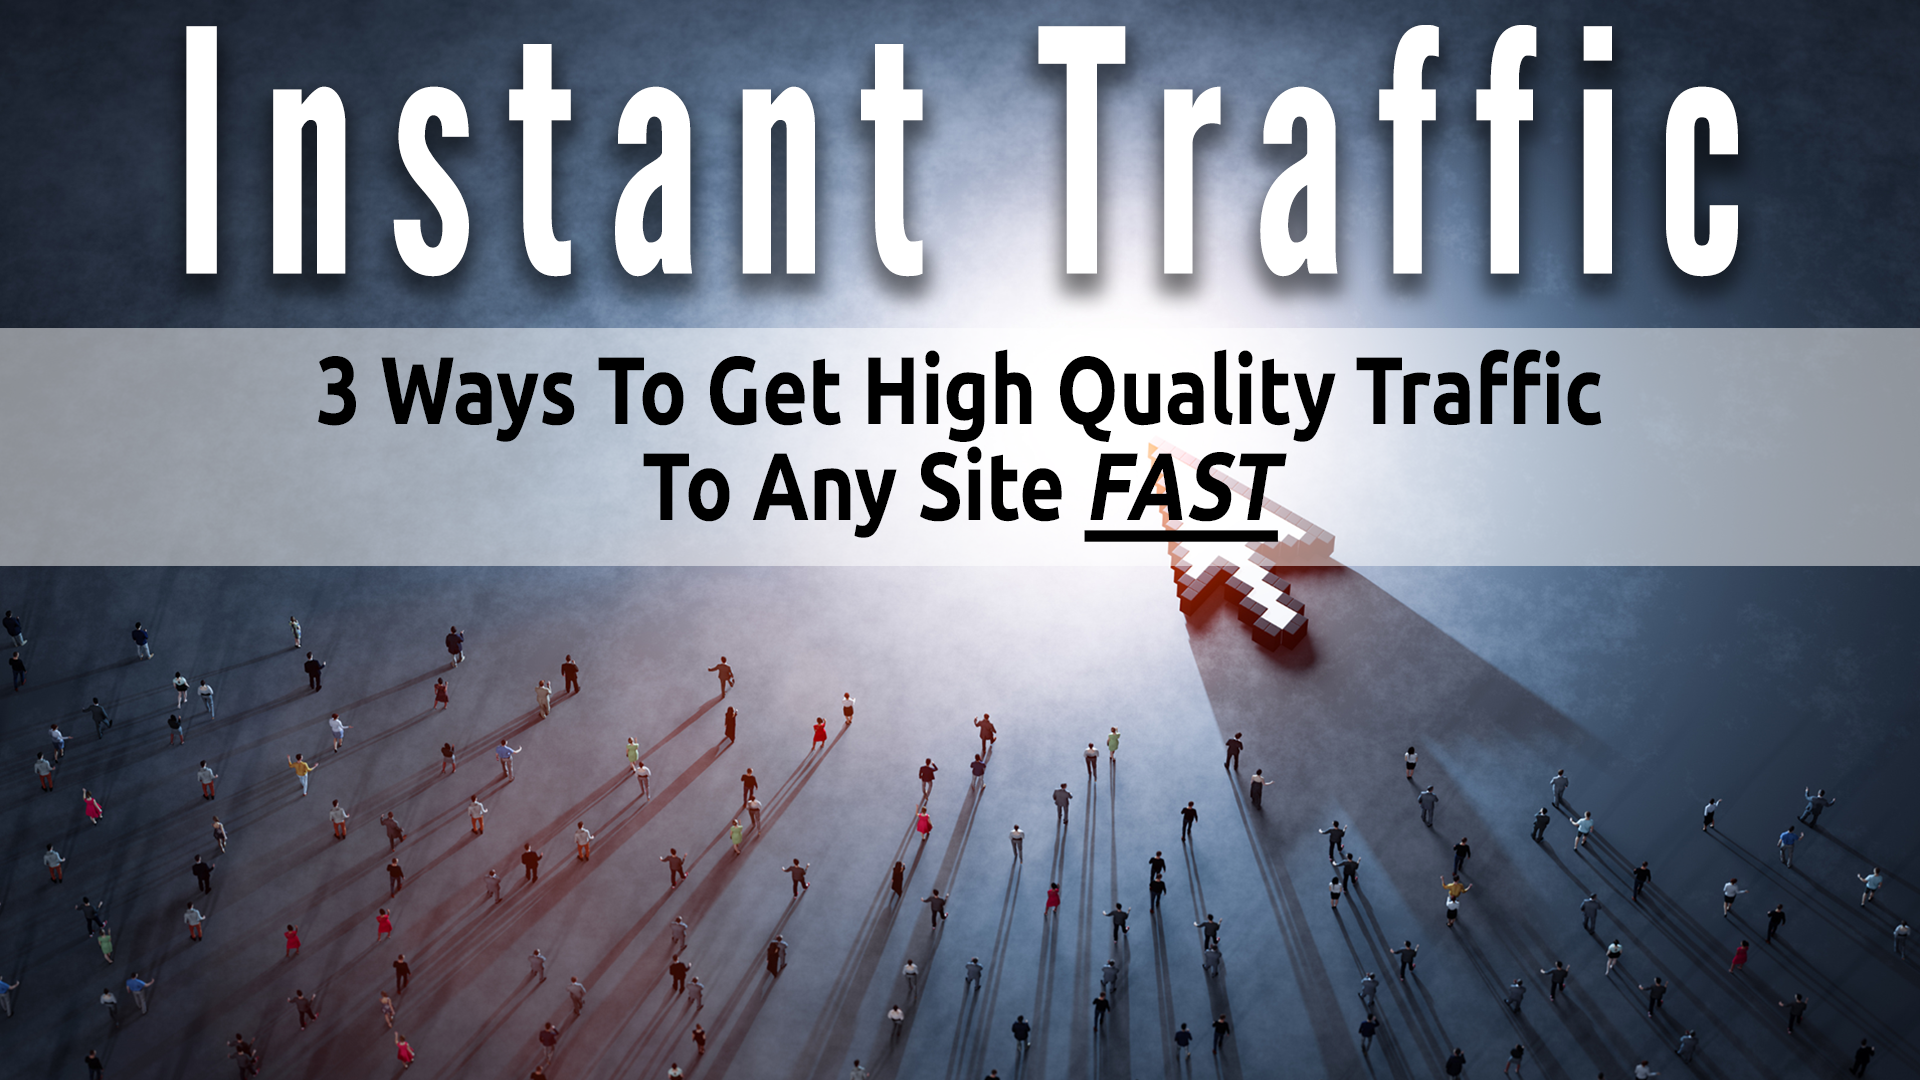 Free Video - How To Get Instant Traffic To Any Site You Want